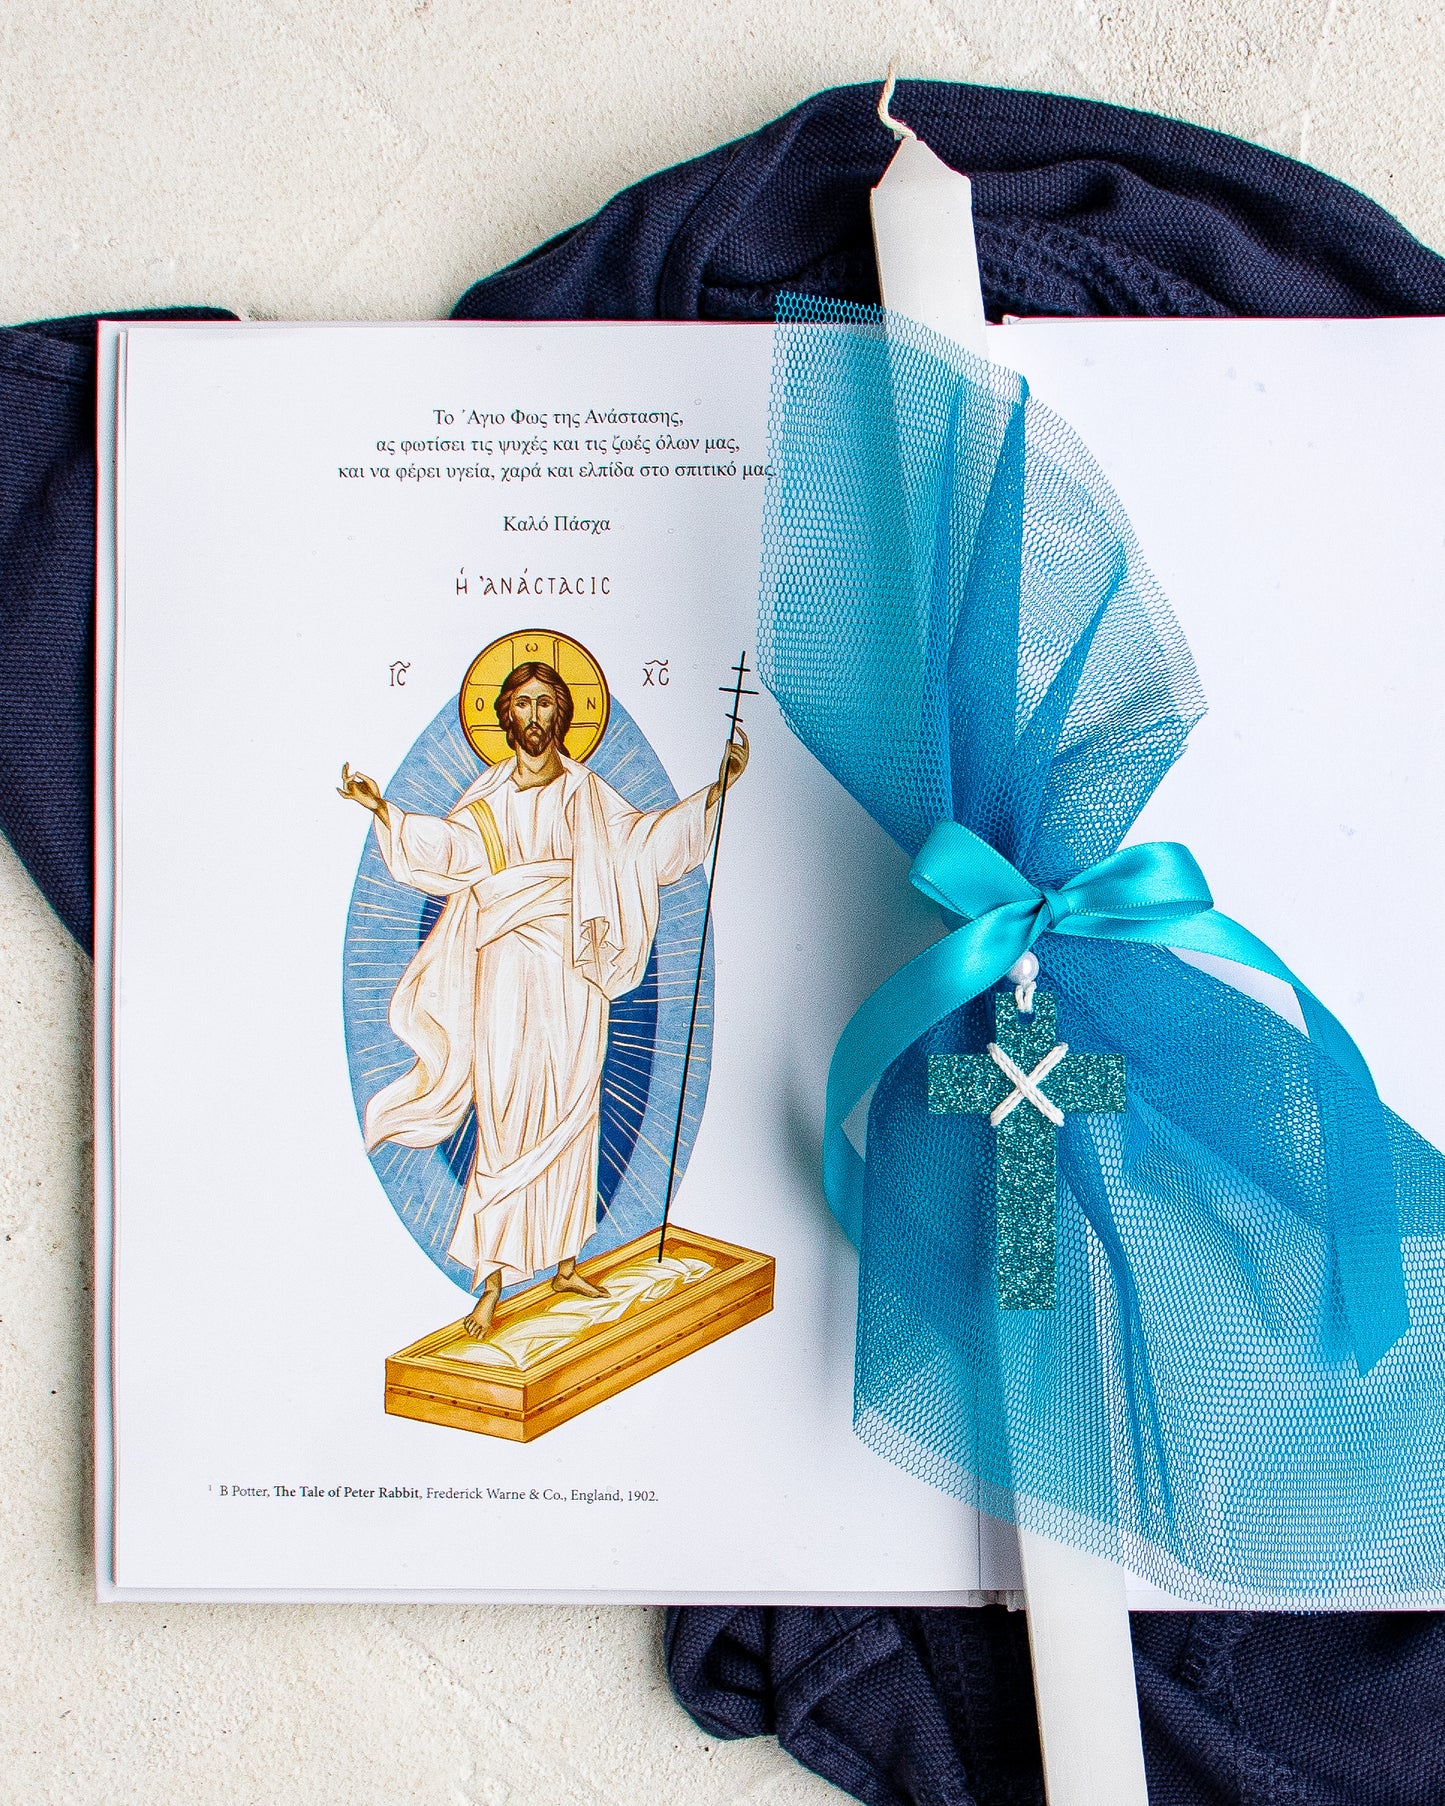 The ABC of Greek Easter Hardcover Book